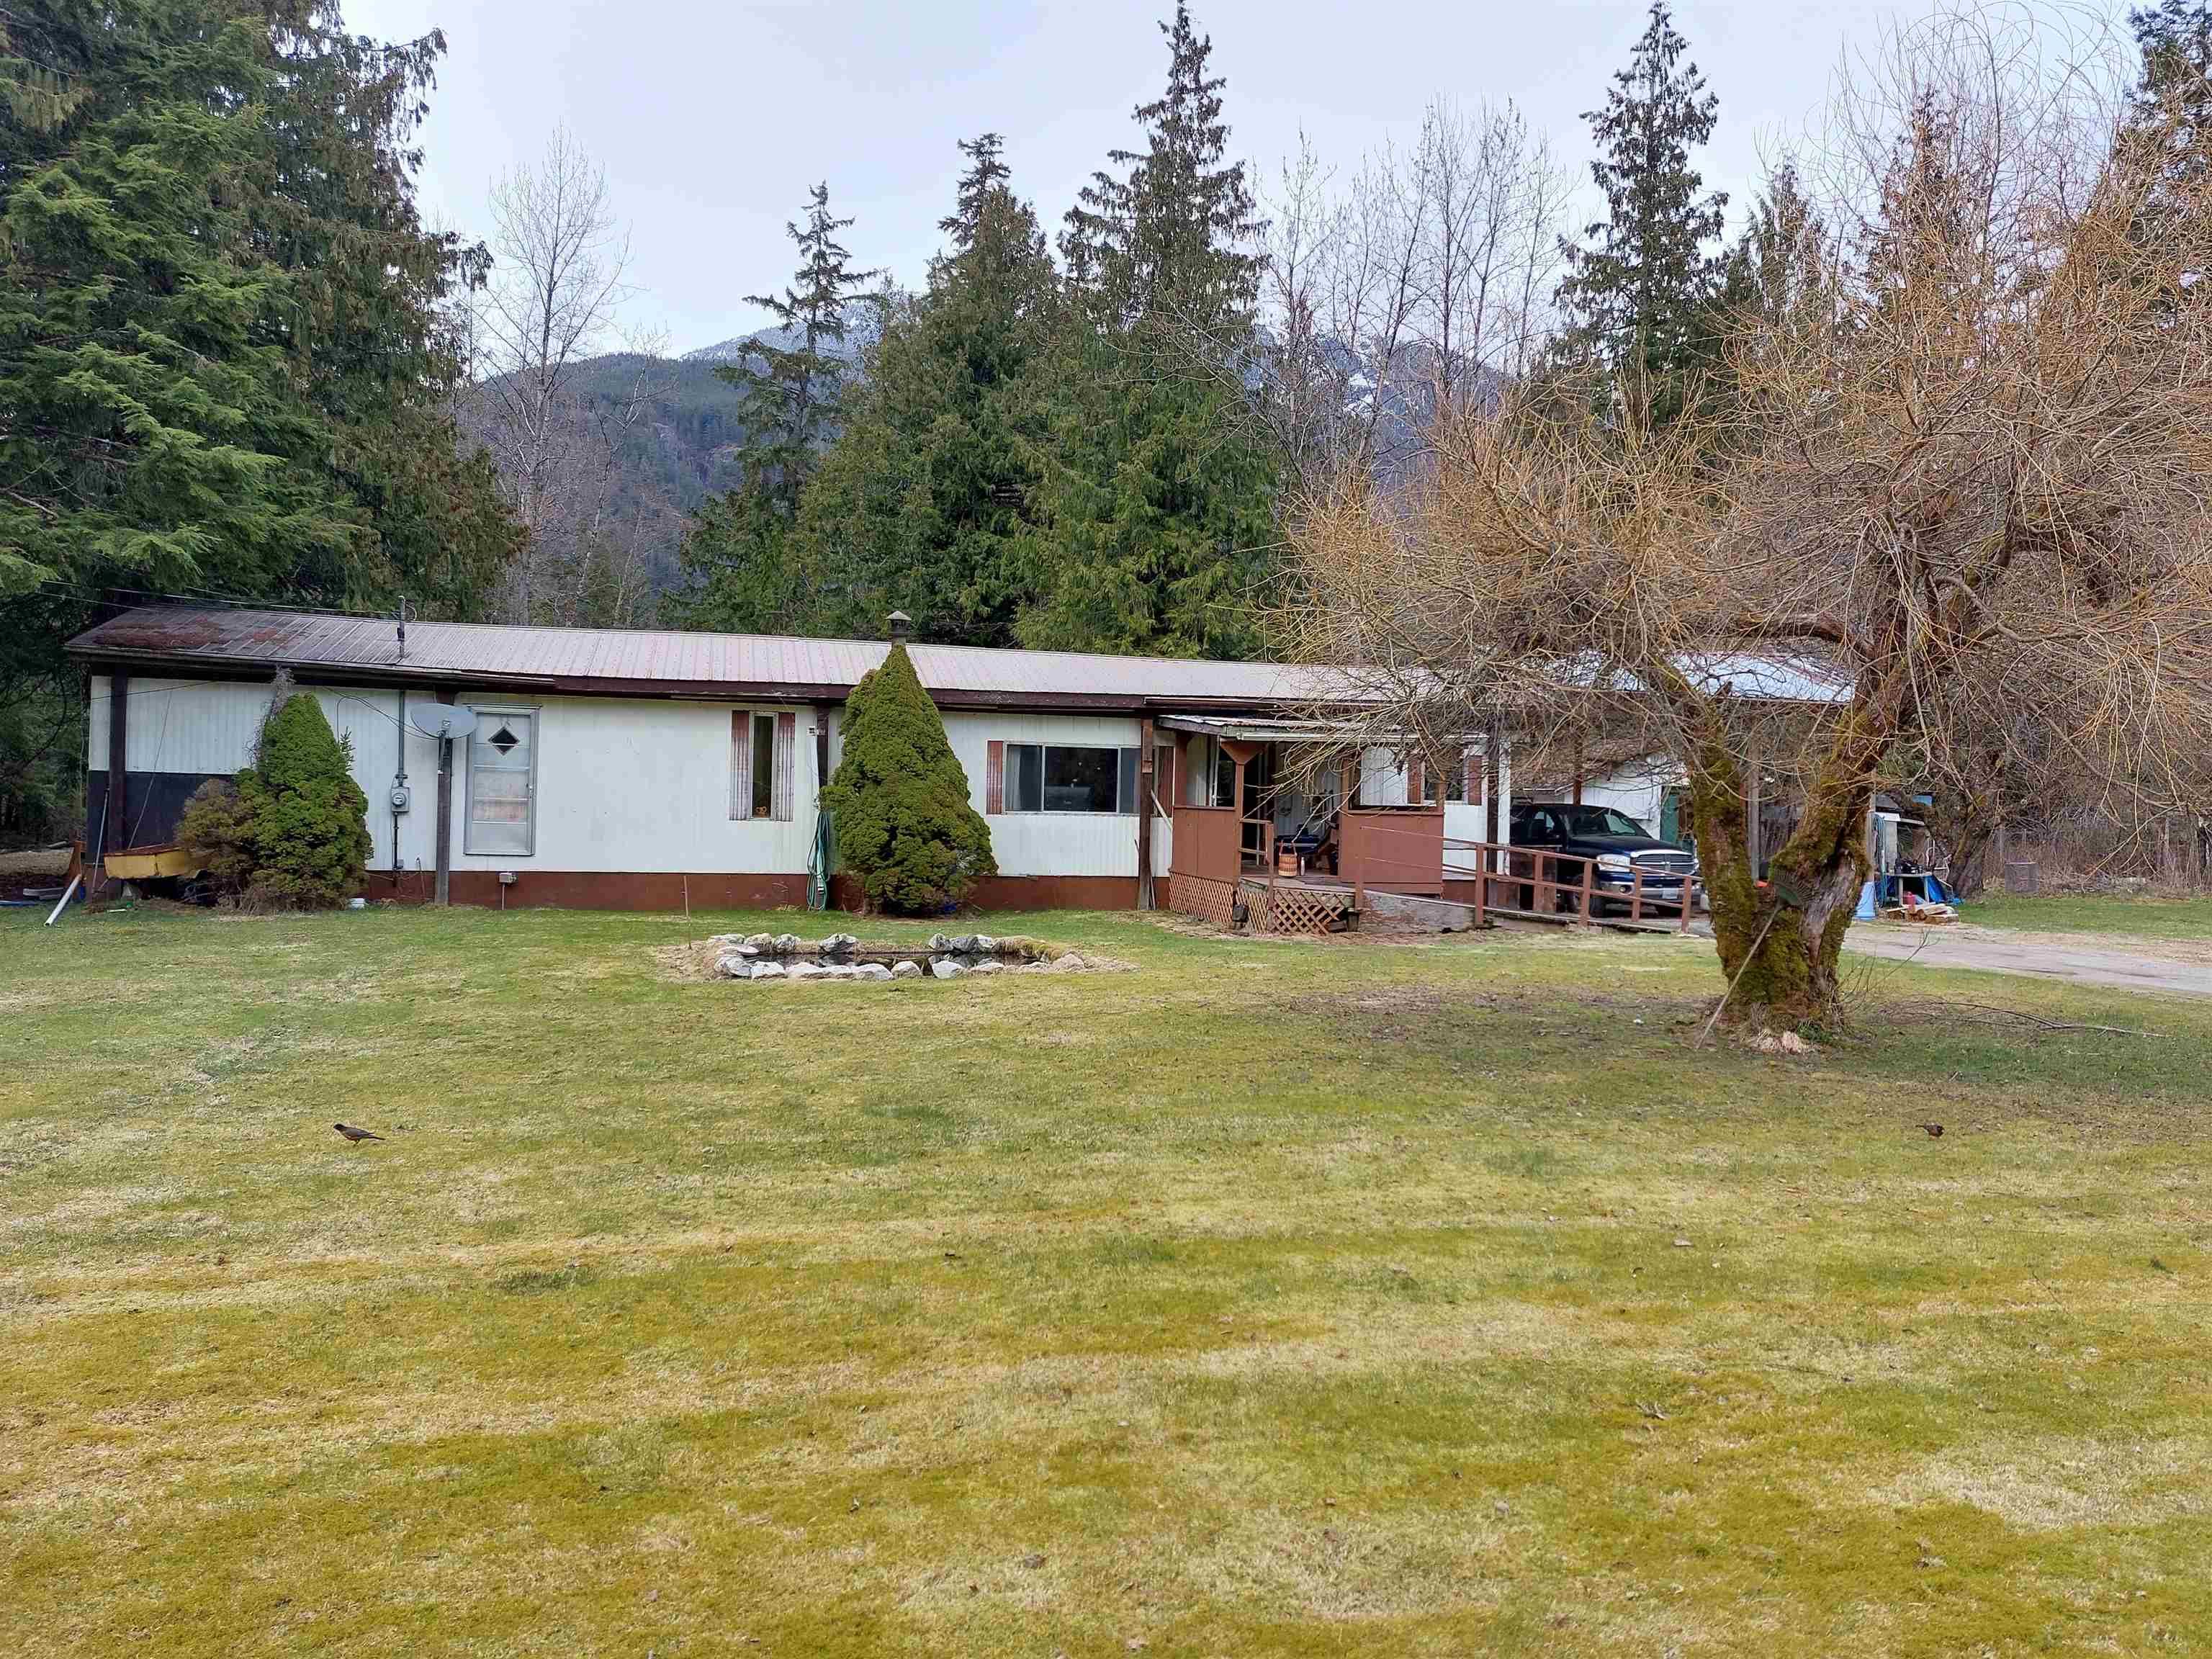 New property listed in Bella Coola/Hagensborg, Williams Lake